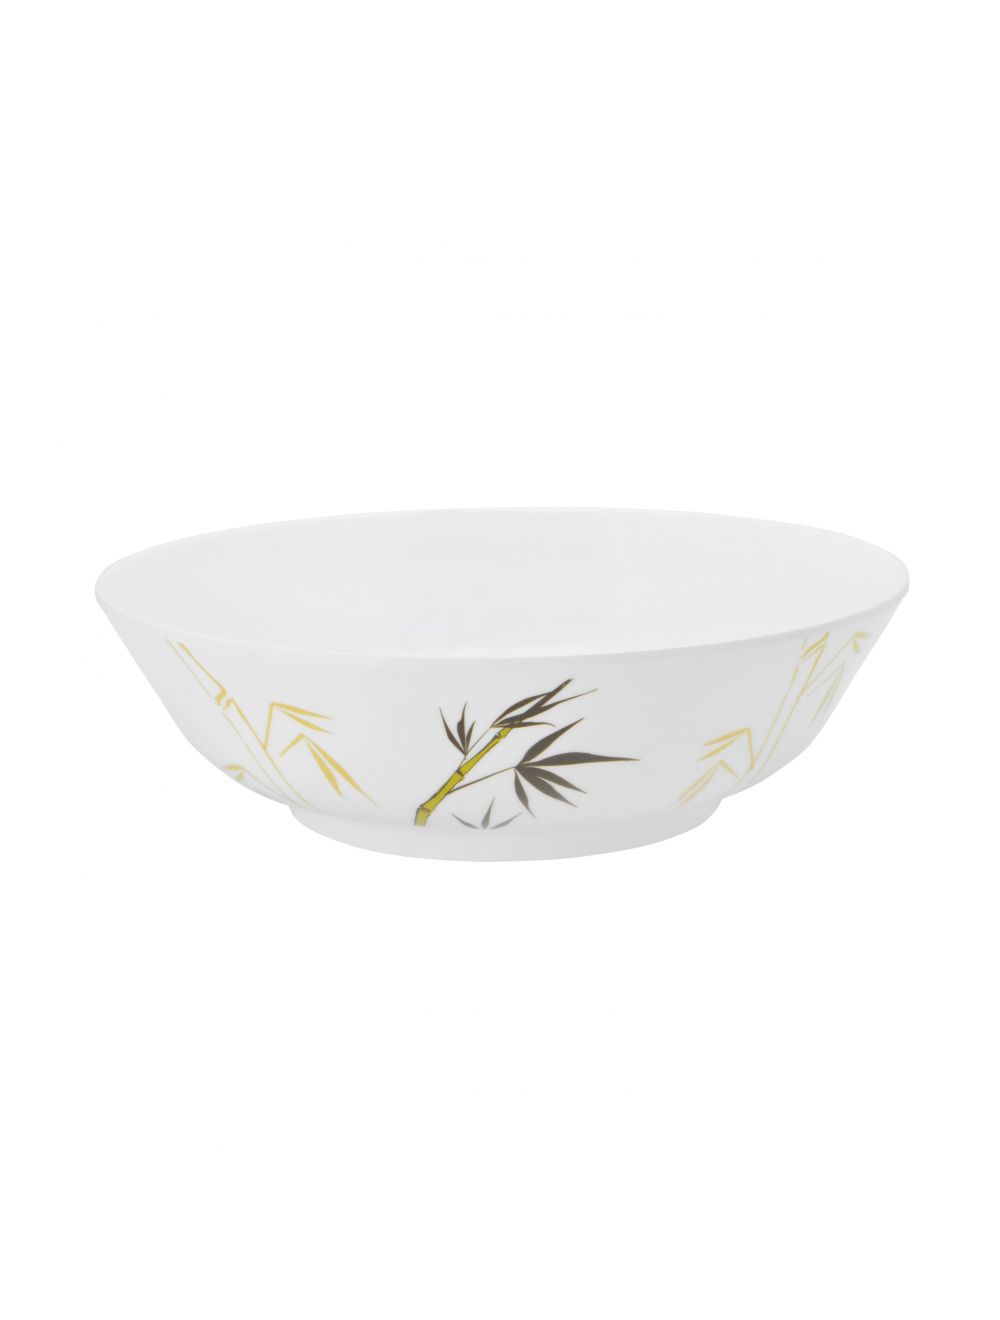 Dinewell Melamine Serving Bowl Green Bamboo-DWC2081GB